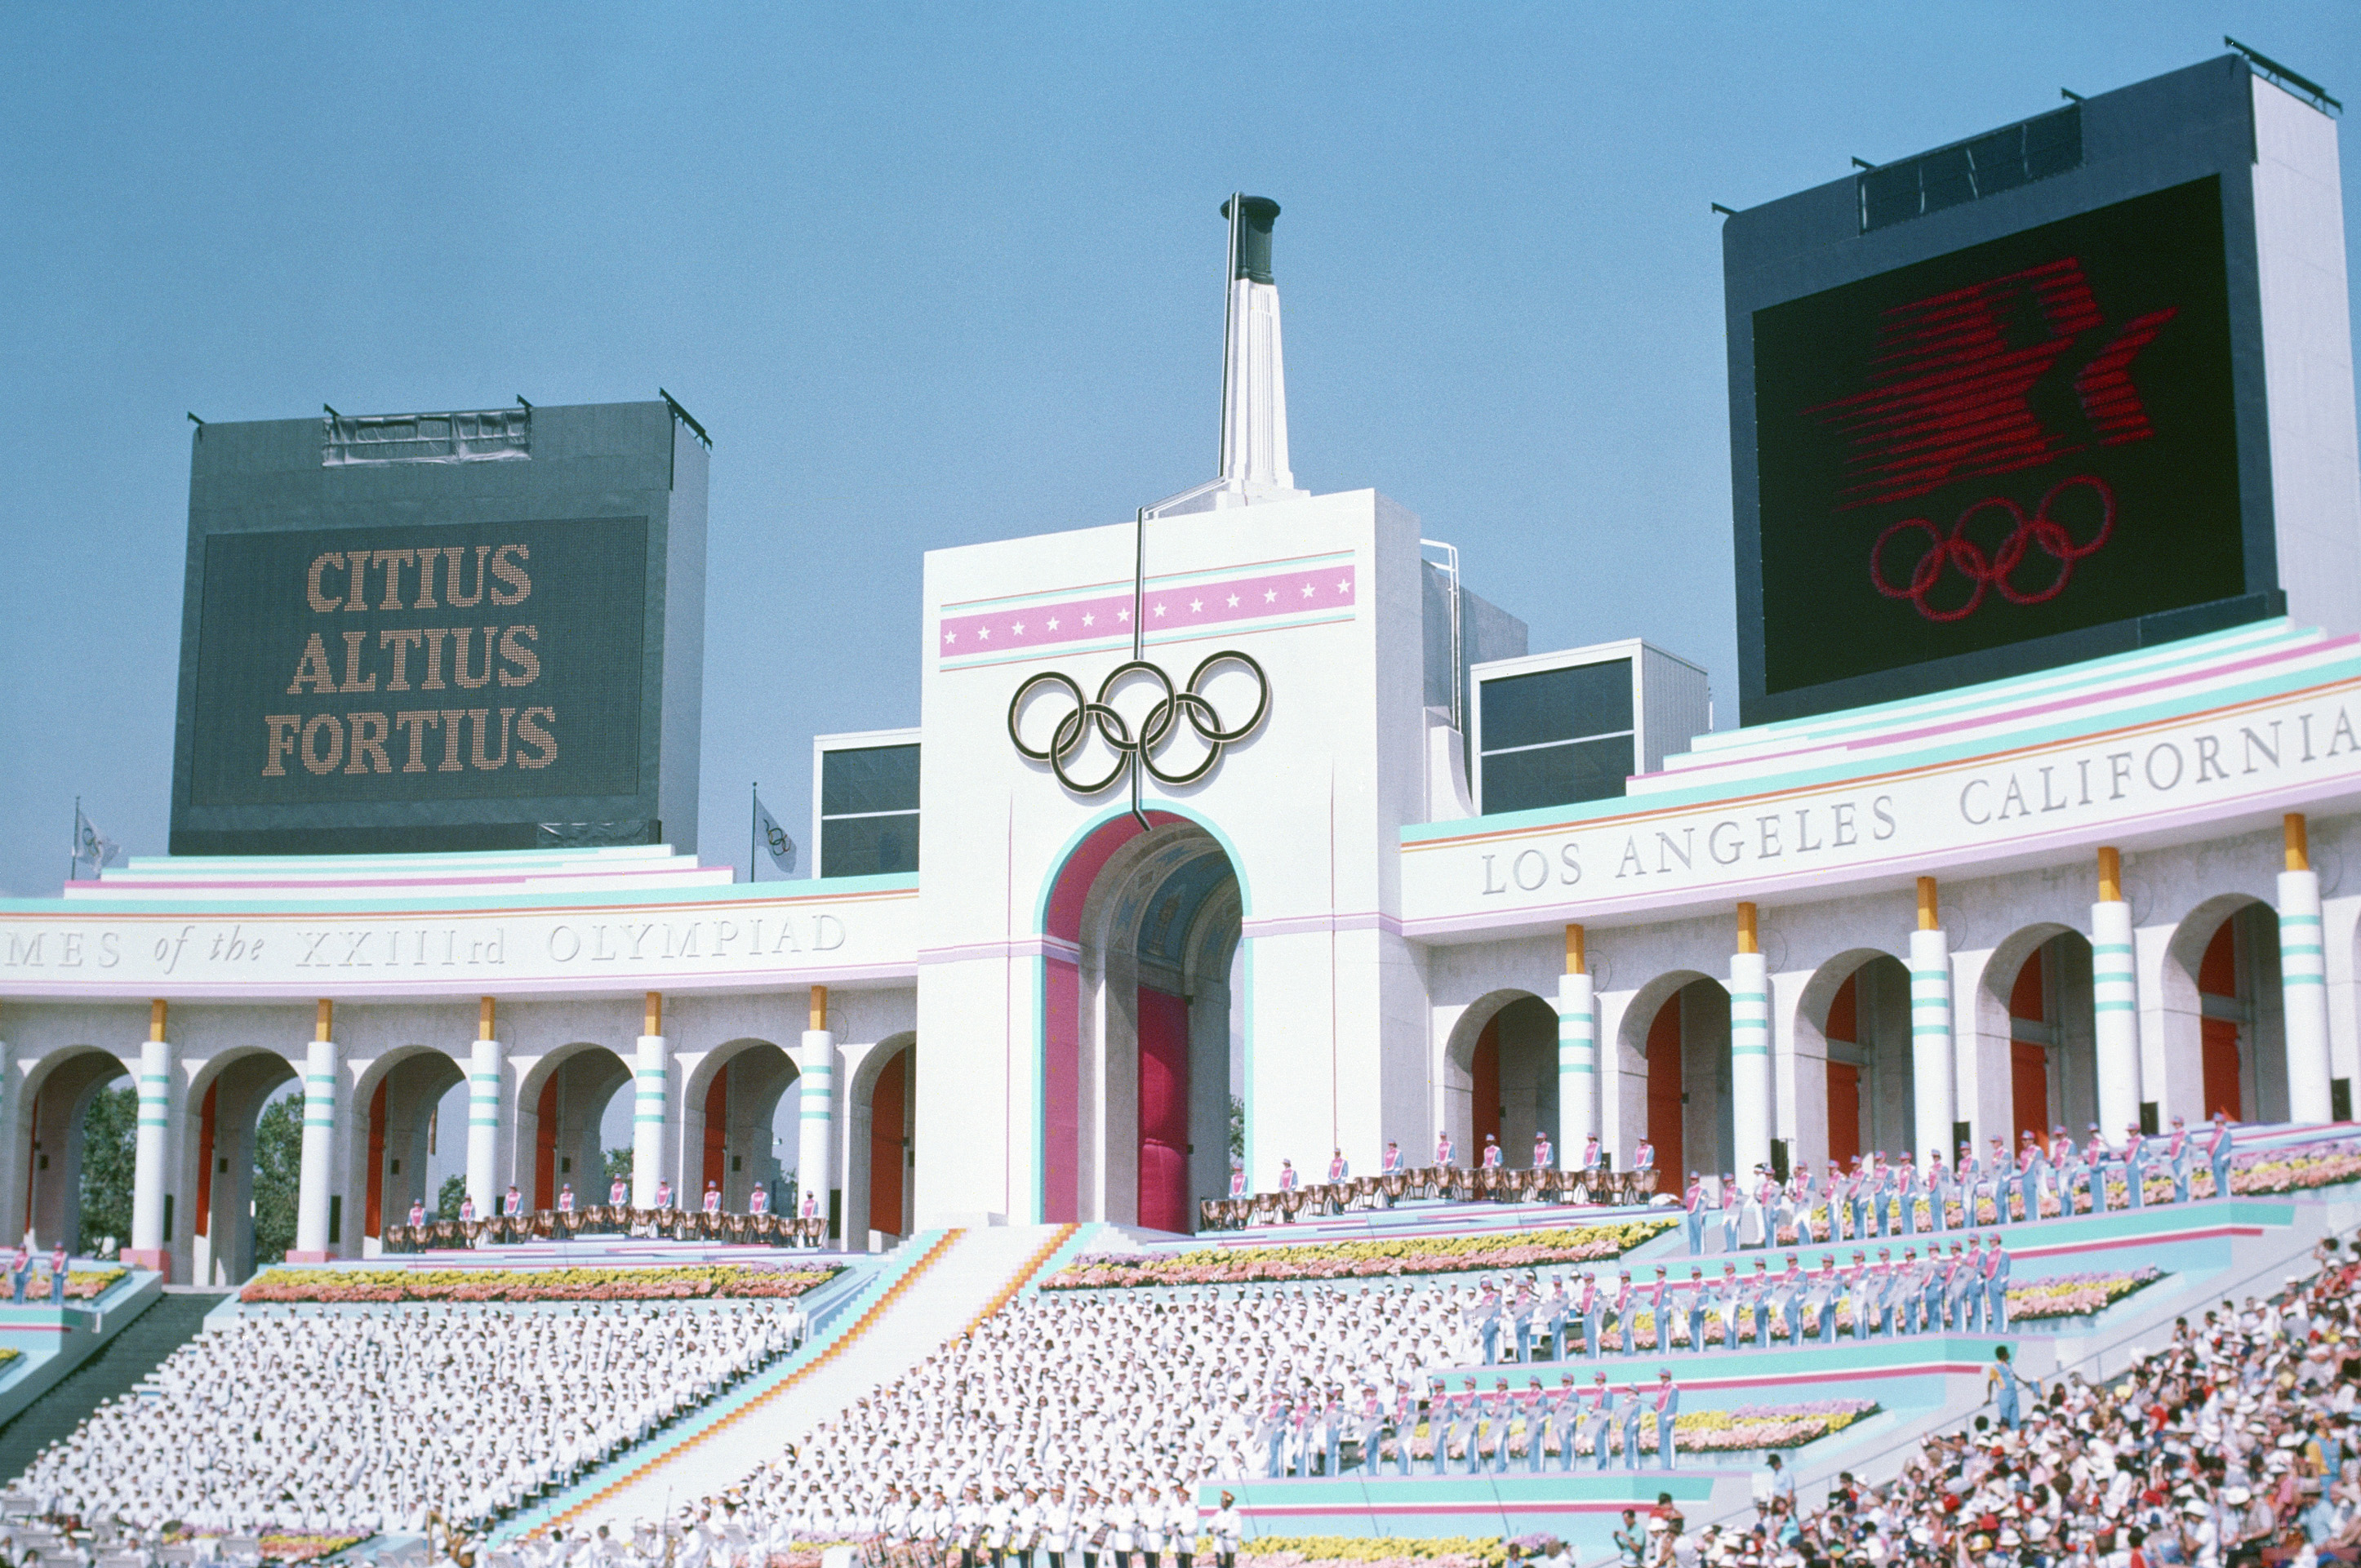 Before the 2028 Olympics, L.A. prepares to transform itself